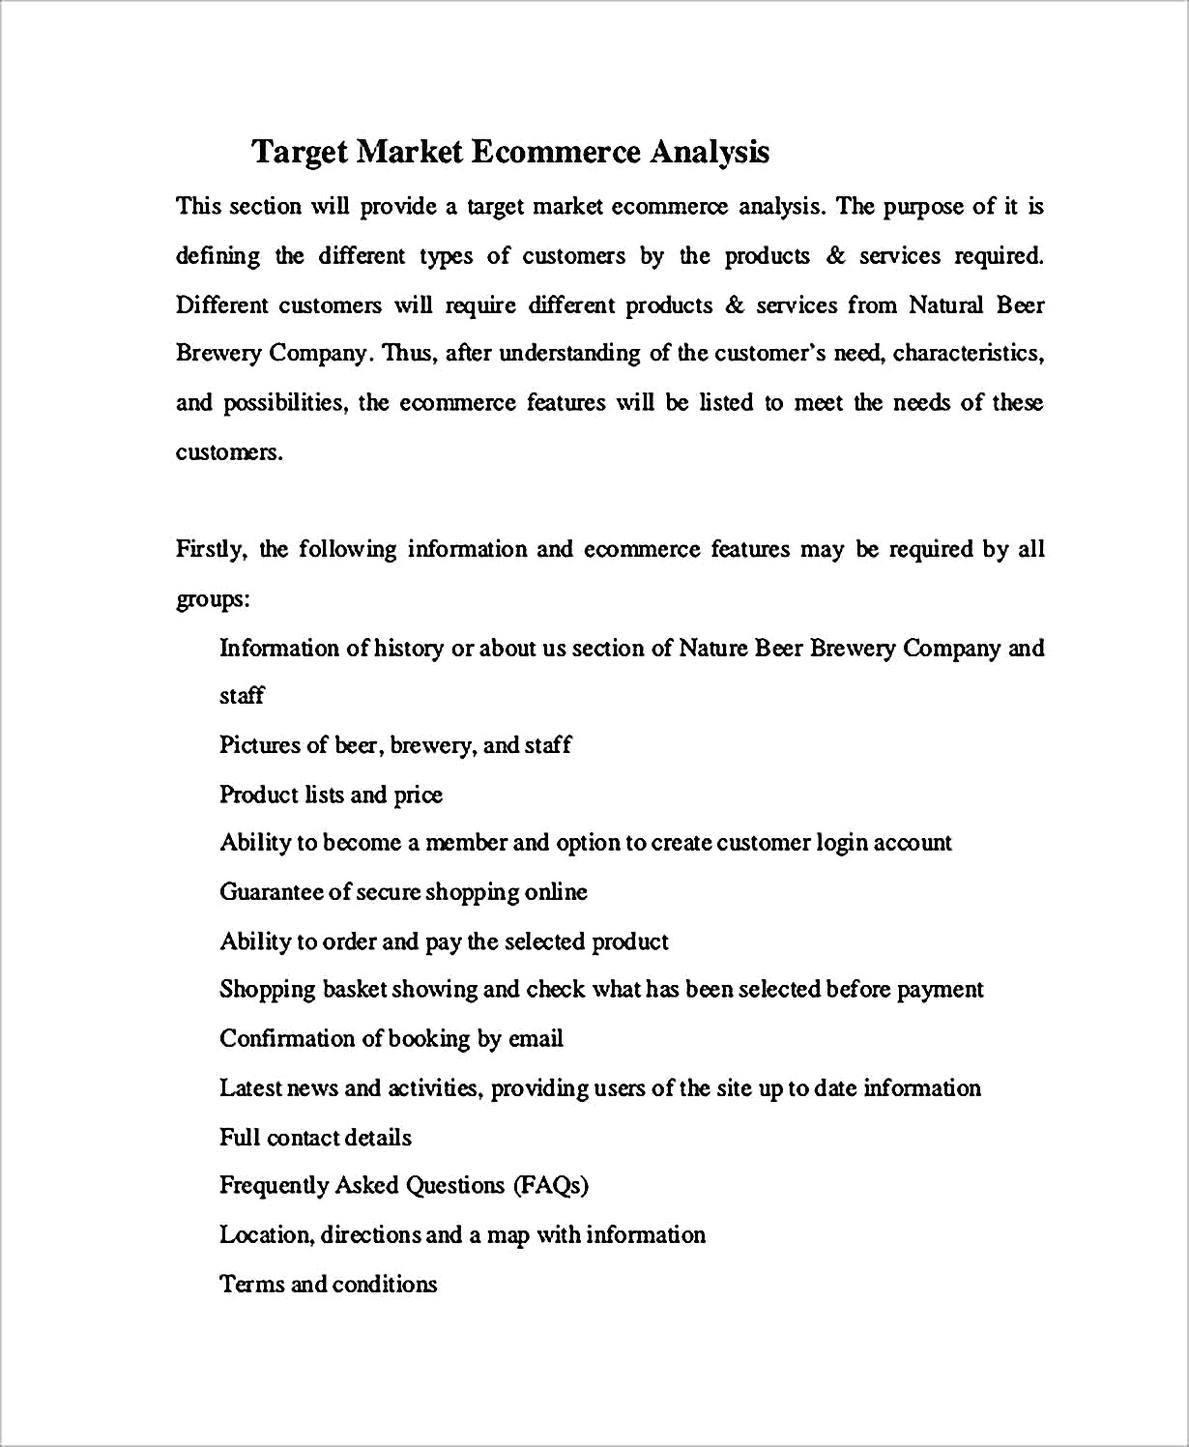 Templates for Target Market Ecommerce Analysis Sample